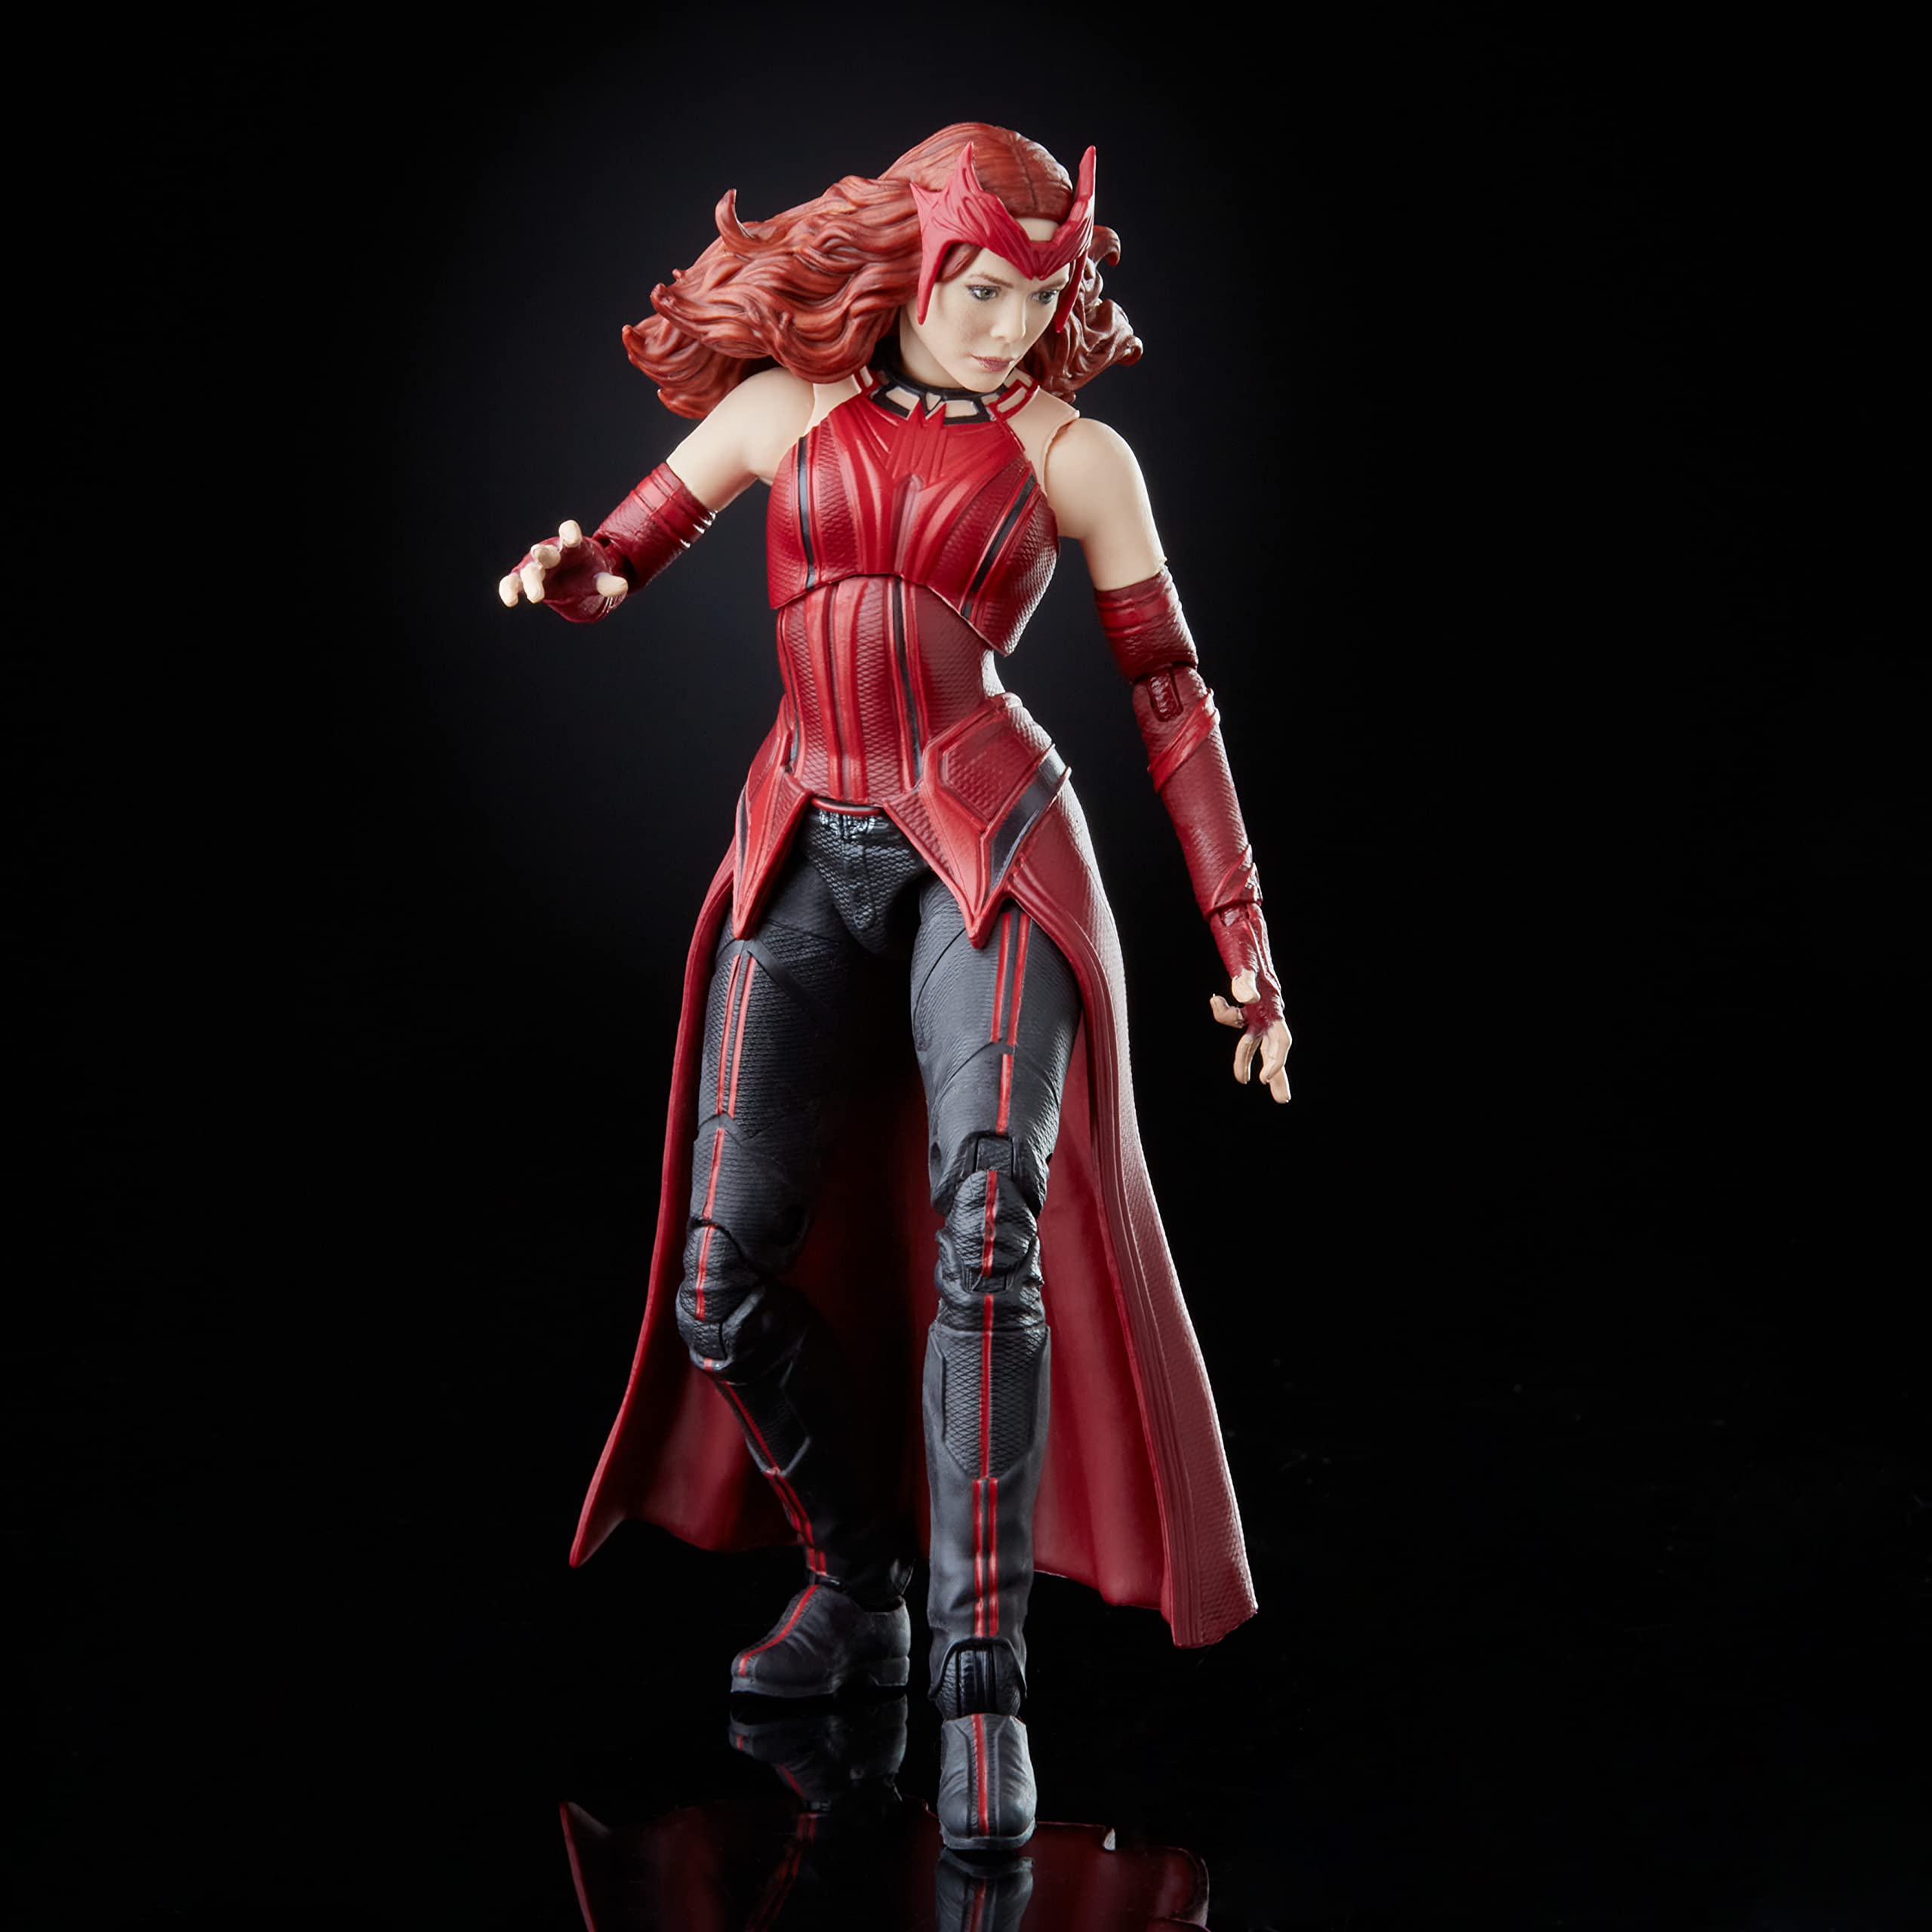 Avengers Hasbro Marvel Legends Series 6-inch Action Figure Toy Scarlet Witch, Premium Design and 4 Accessories, for Kids Age 4 and Up